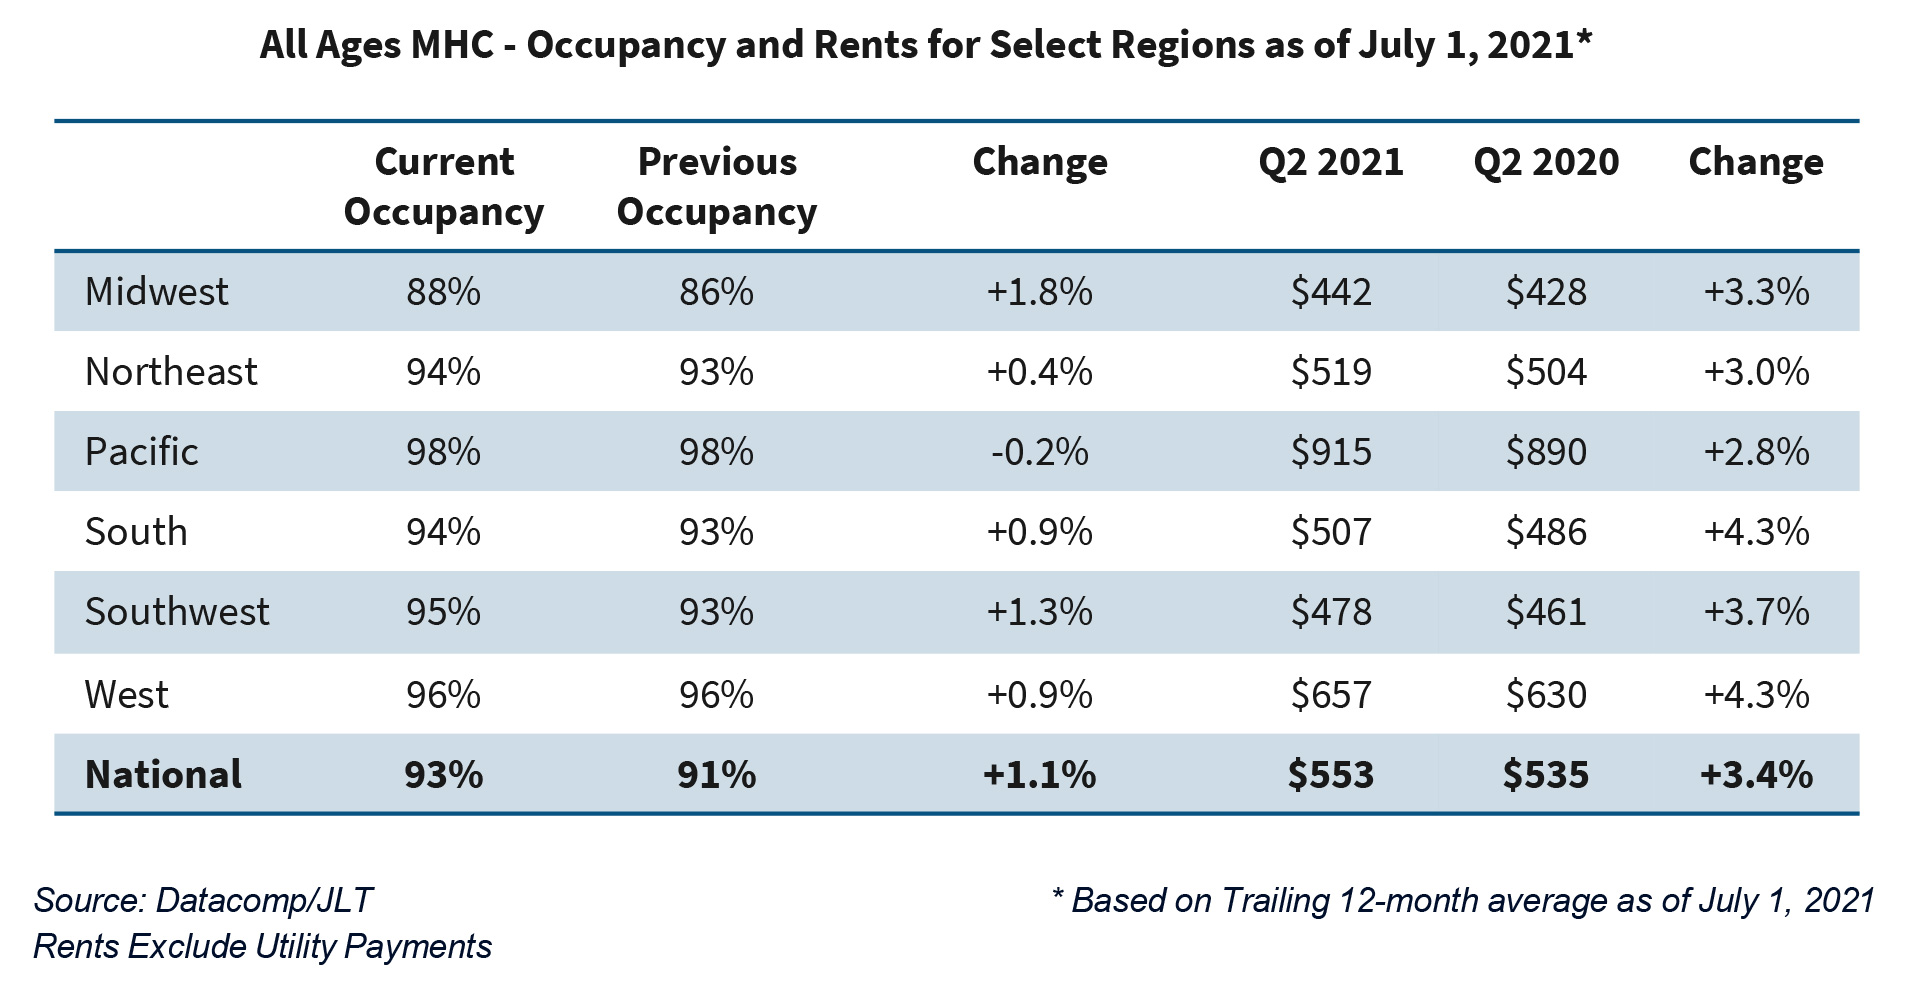 All Ages MHC - Occupancy and Rents for Select Regions as of July 1, 2021